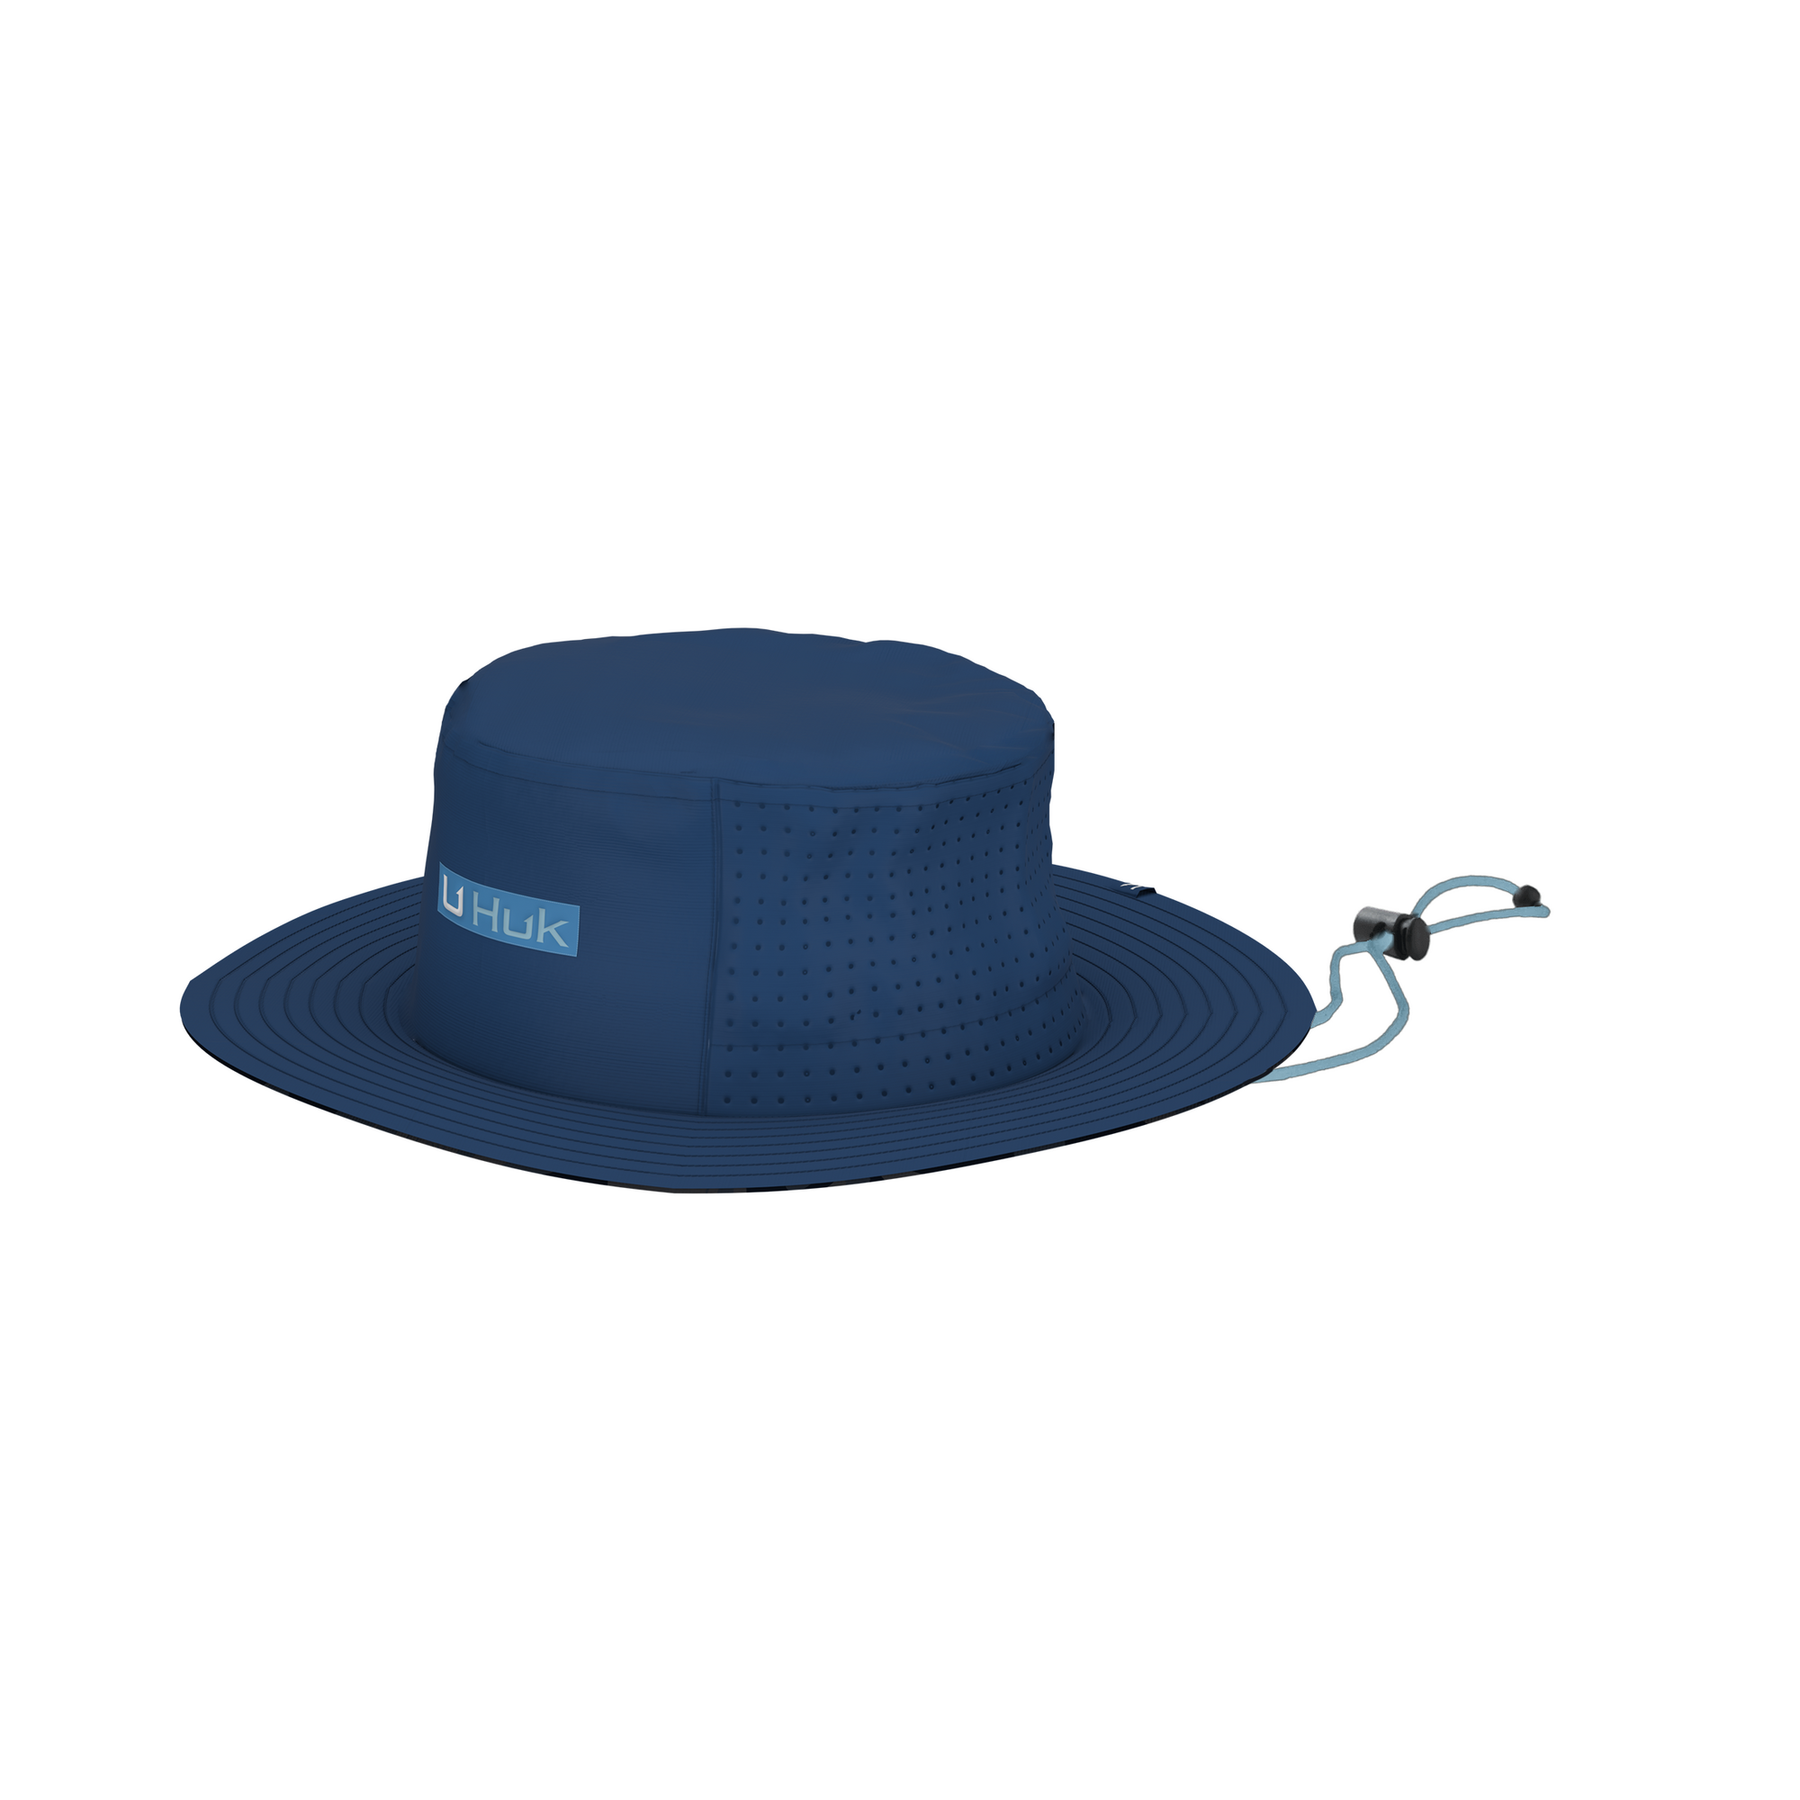 YSWPNA XL Bucket Hats for Men Windmill Under View with Blue Sky